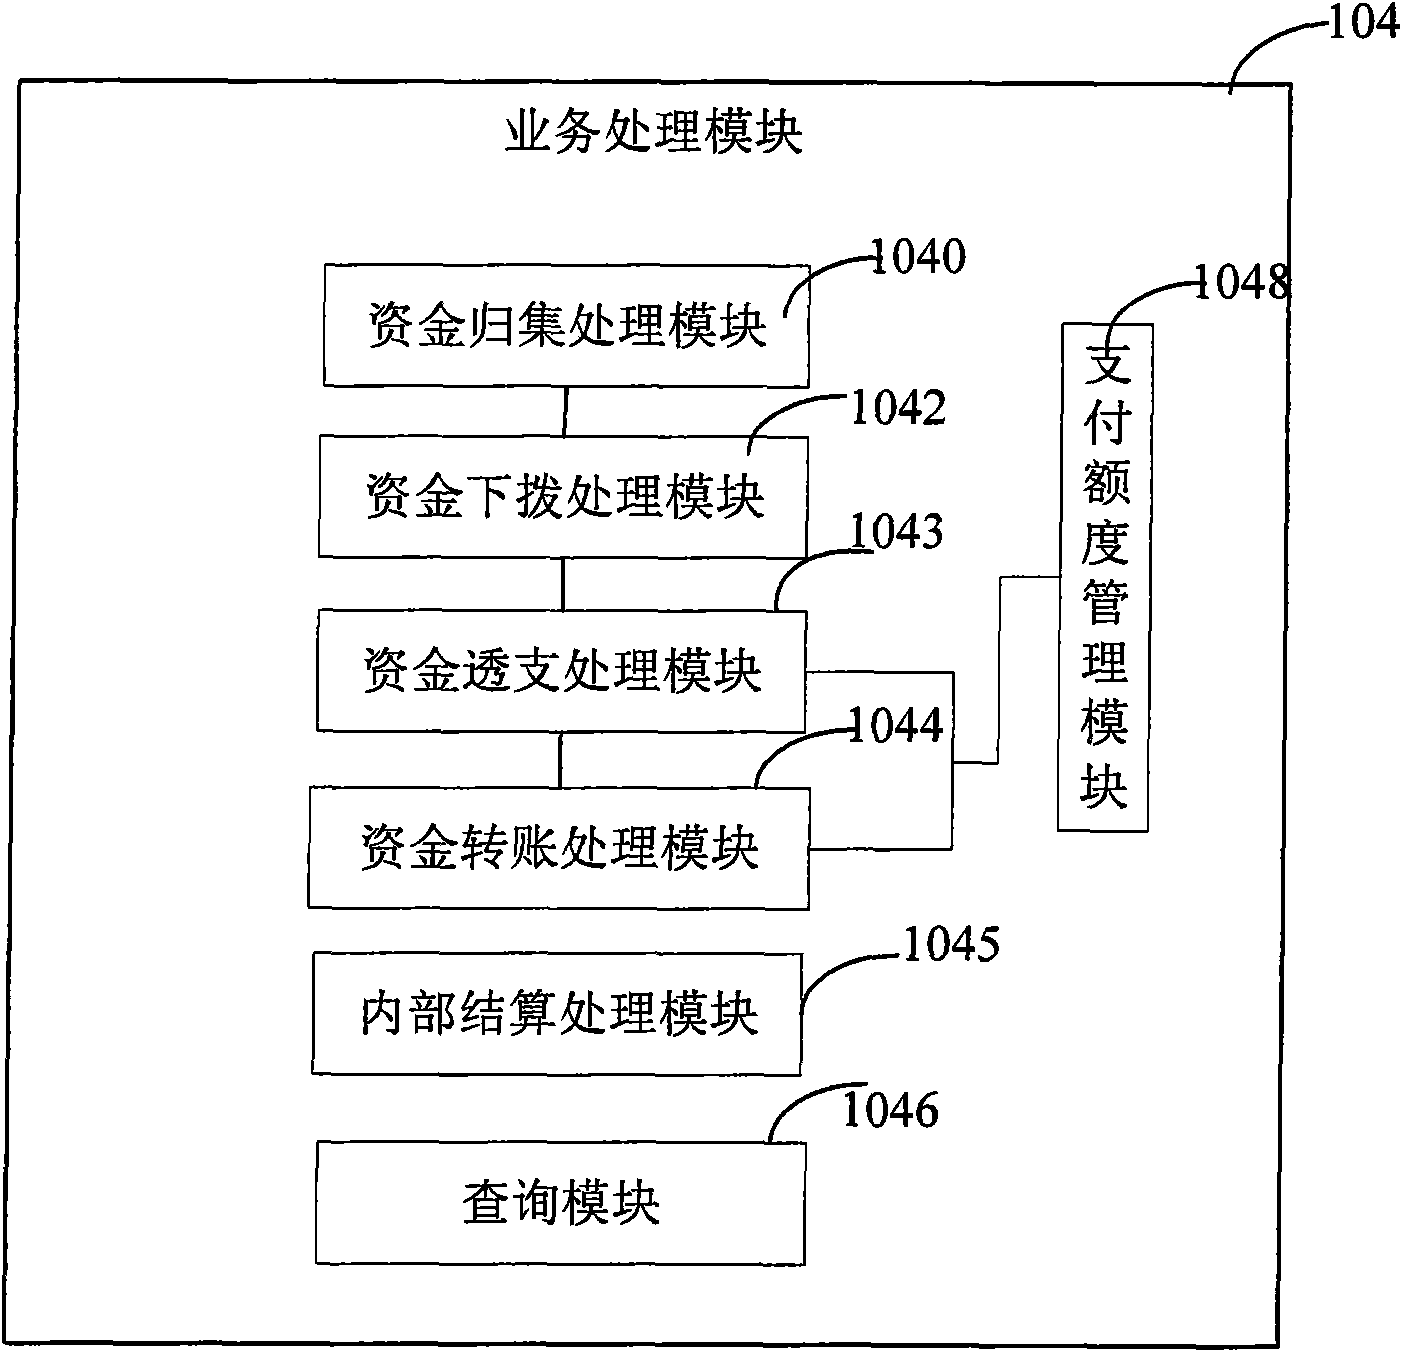 Multistage account fund management system and device